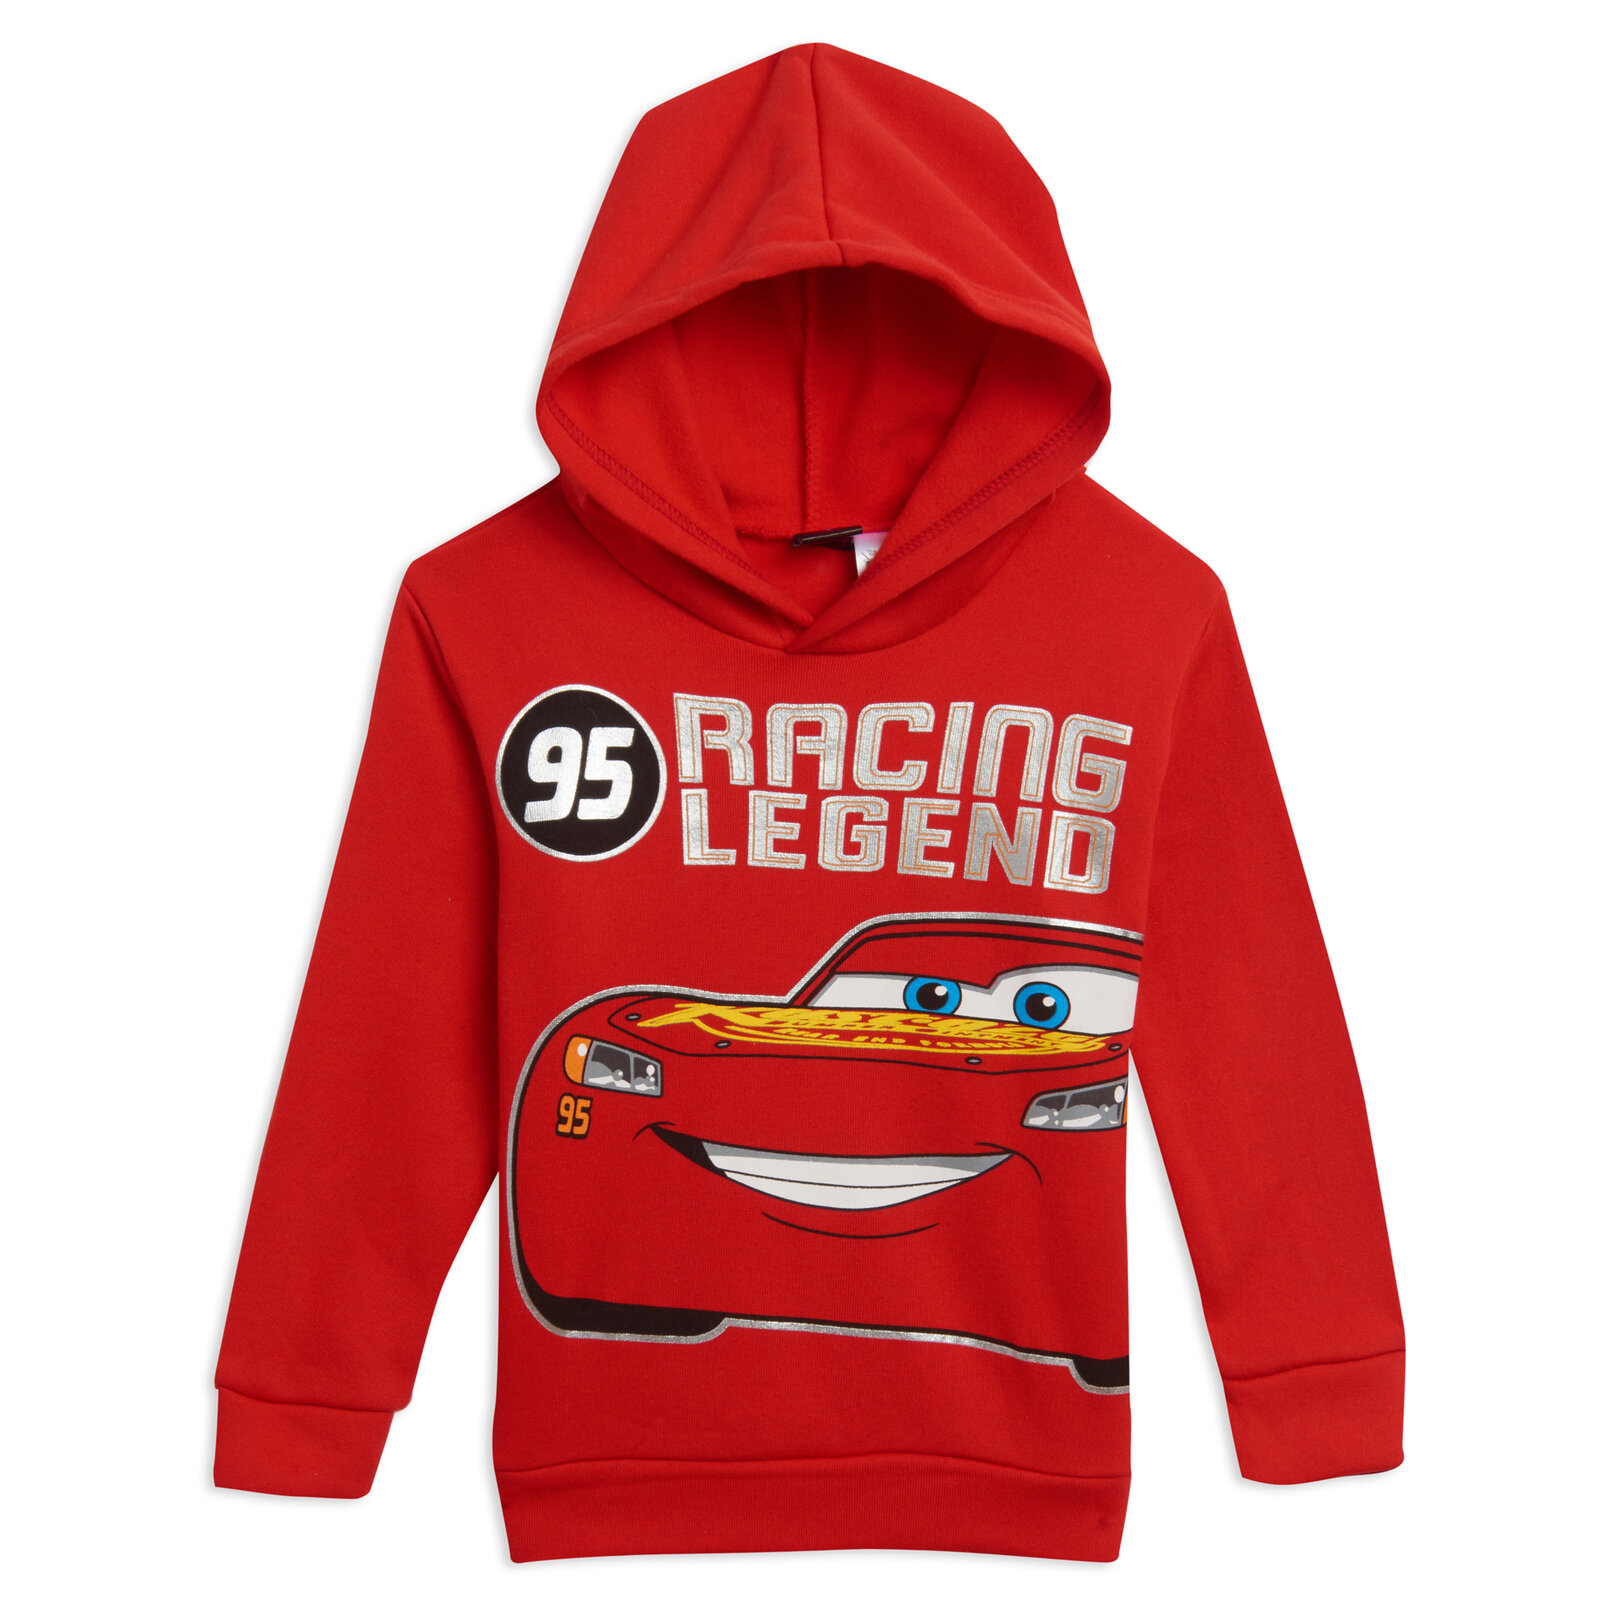 Disney Pixar Cars Lightning McQueen Toddler Boys Hoodie and Pants Outfit Set Toddler to Big Kid - image 3 of 5